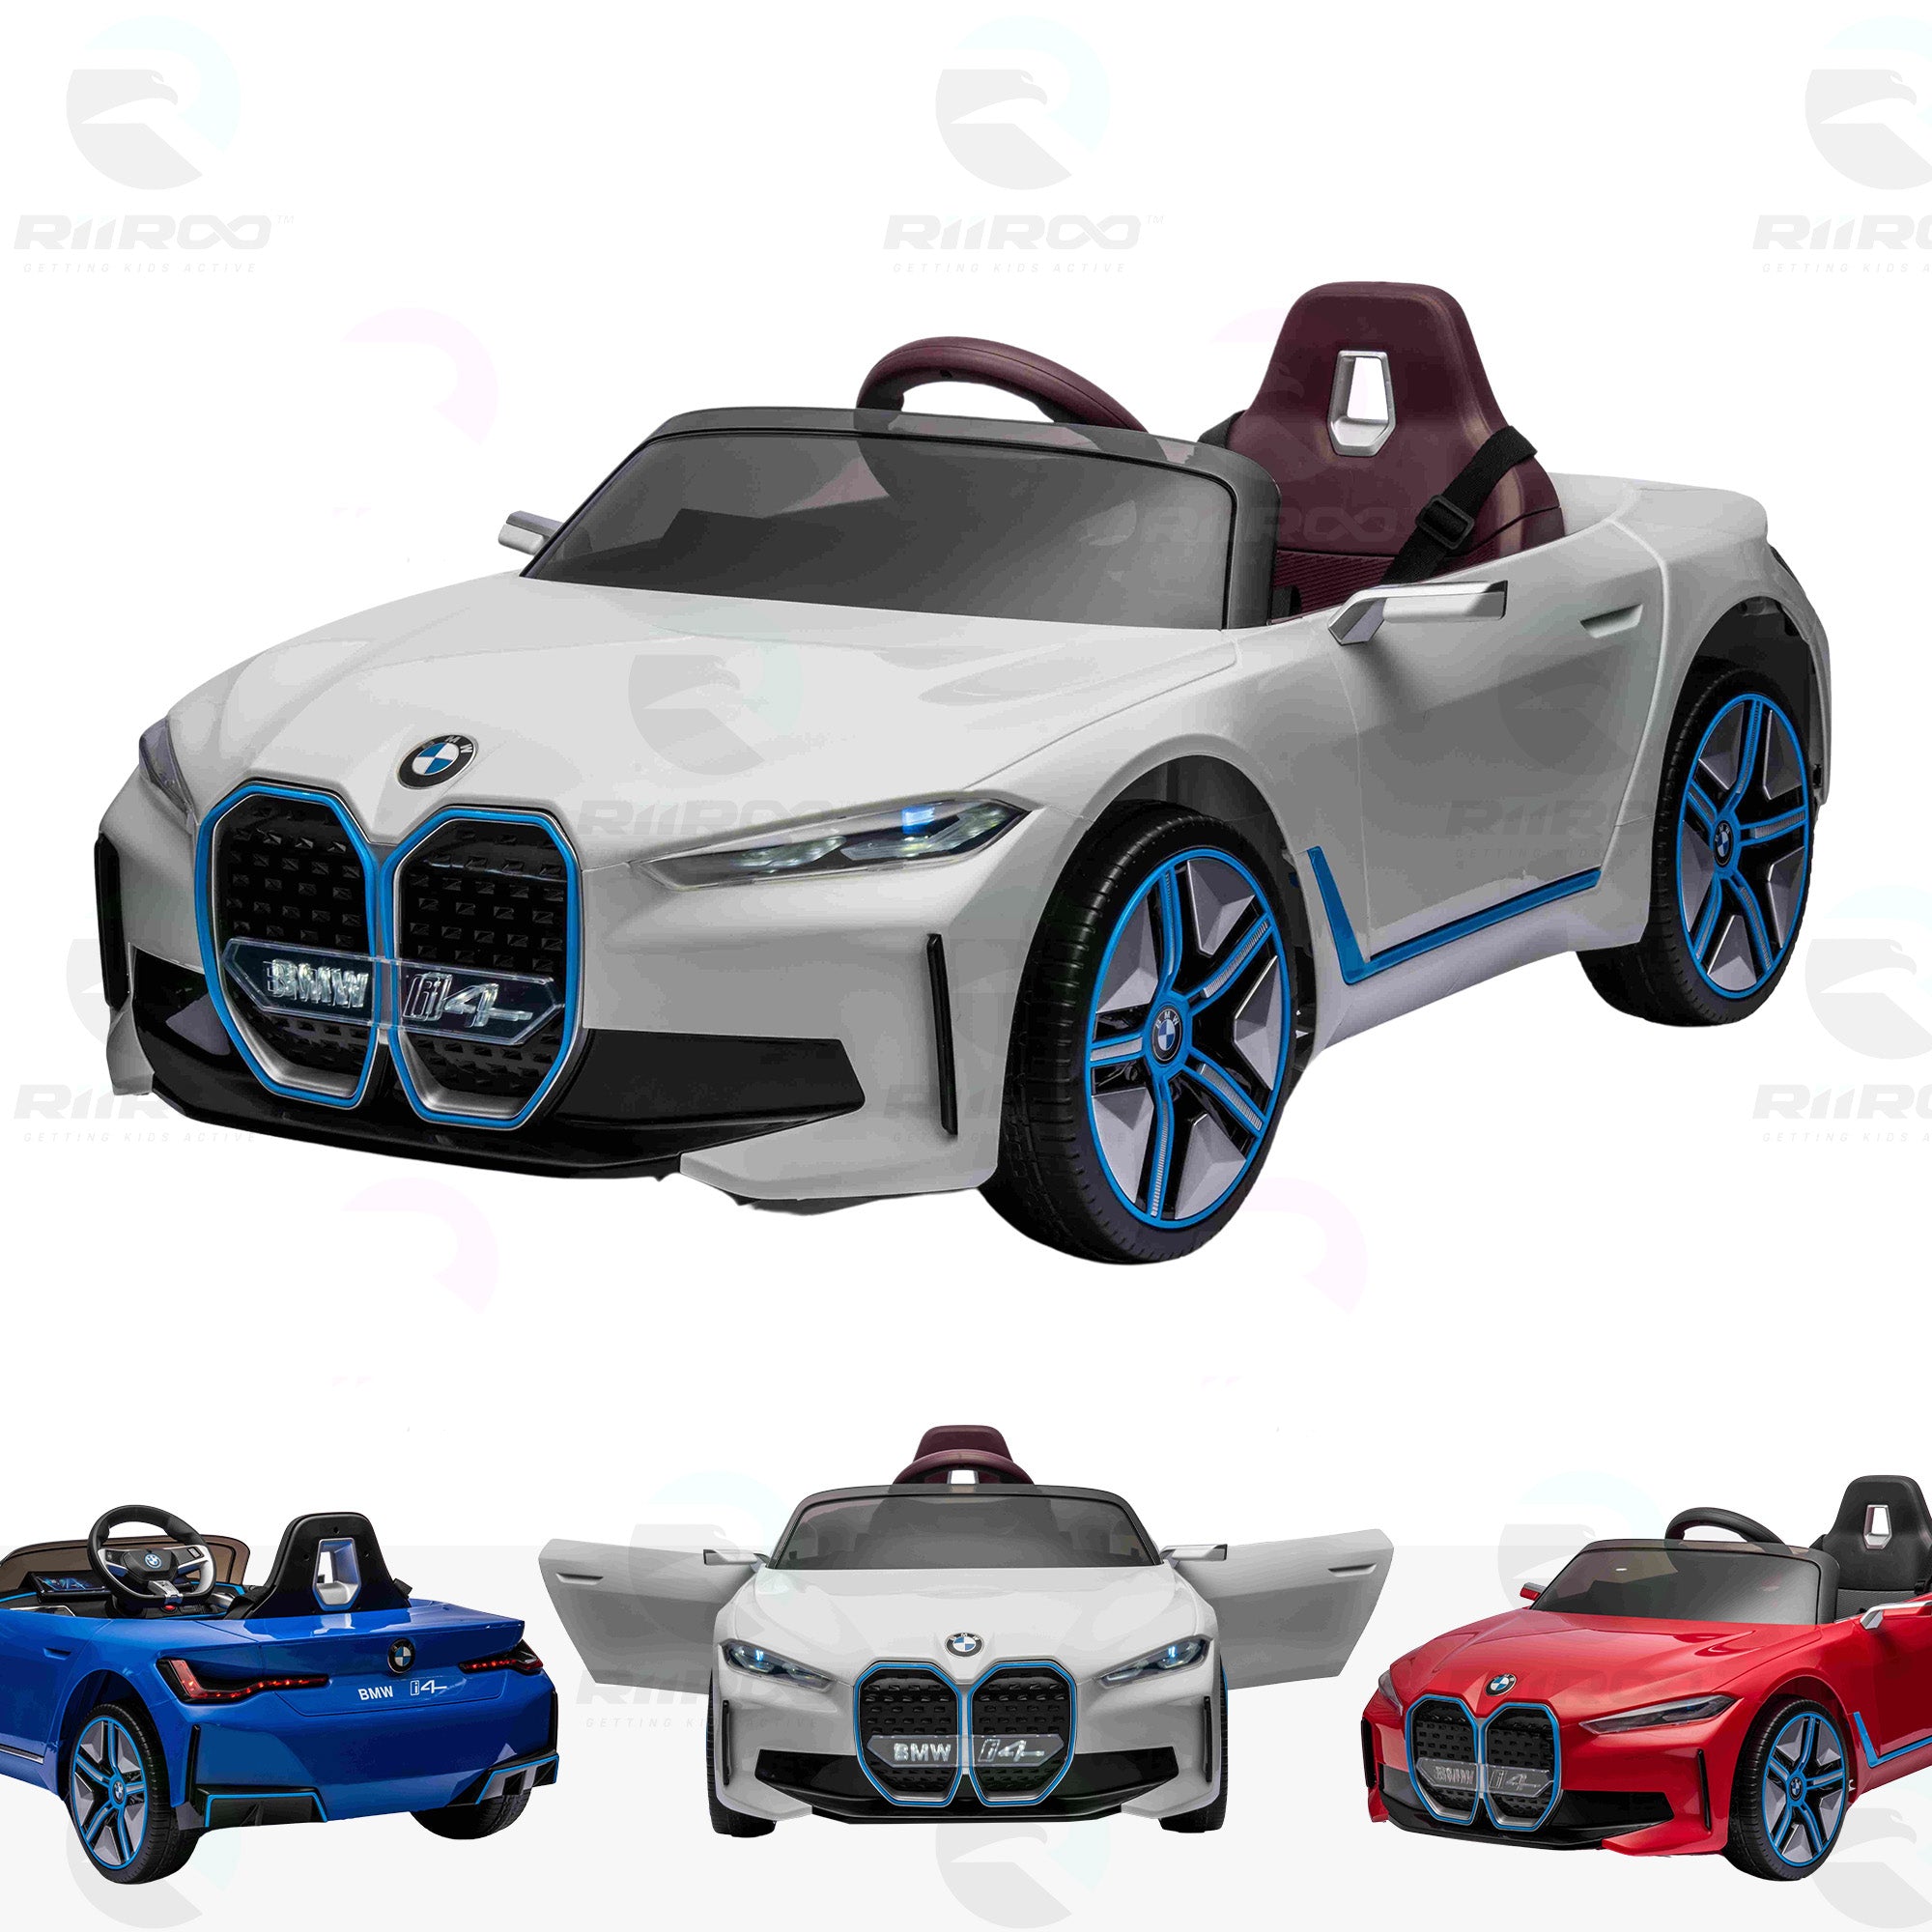 🚗 Official BMW I4: Premium 12V Kids Electric Ride-On Car by RiiRoo